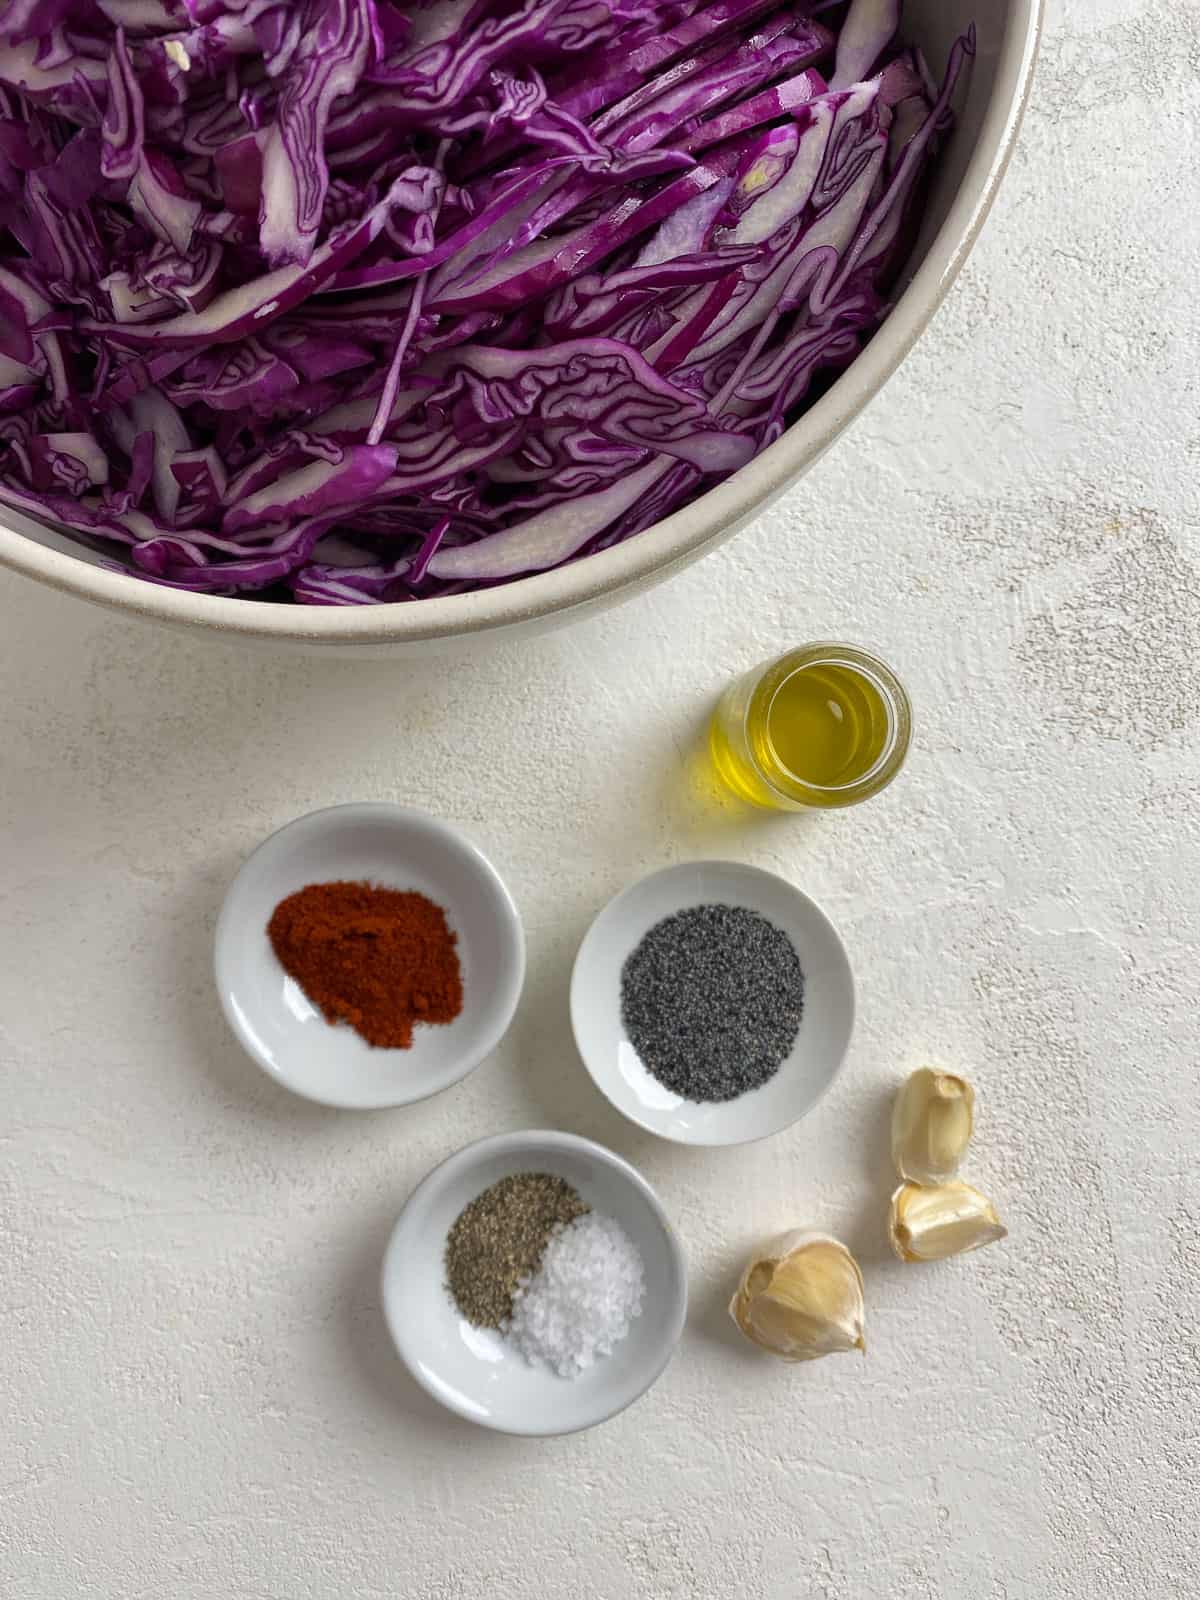 ingredients for Easy Vegan Fried Cabbage measured out against a light surface